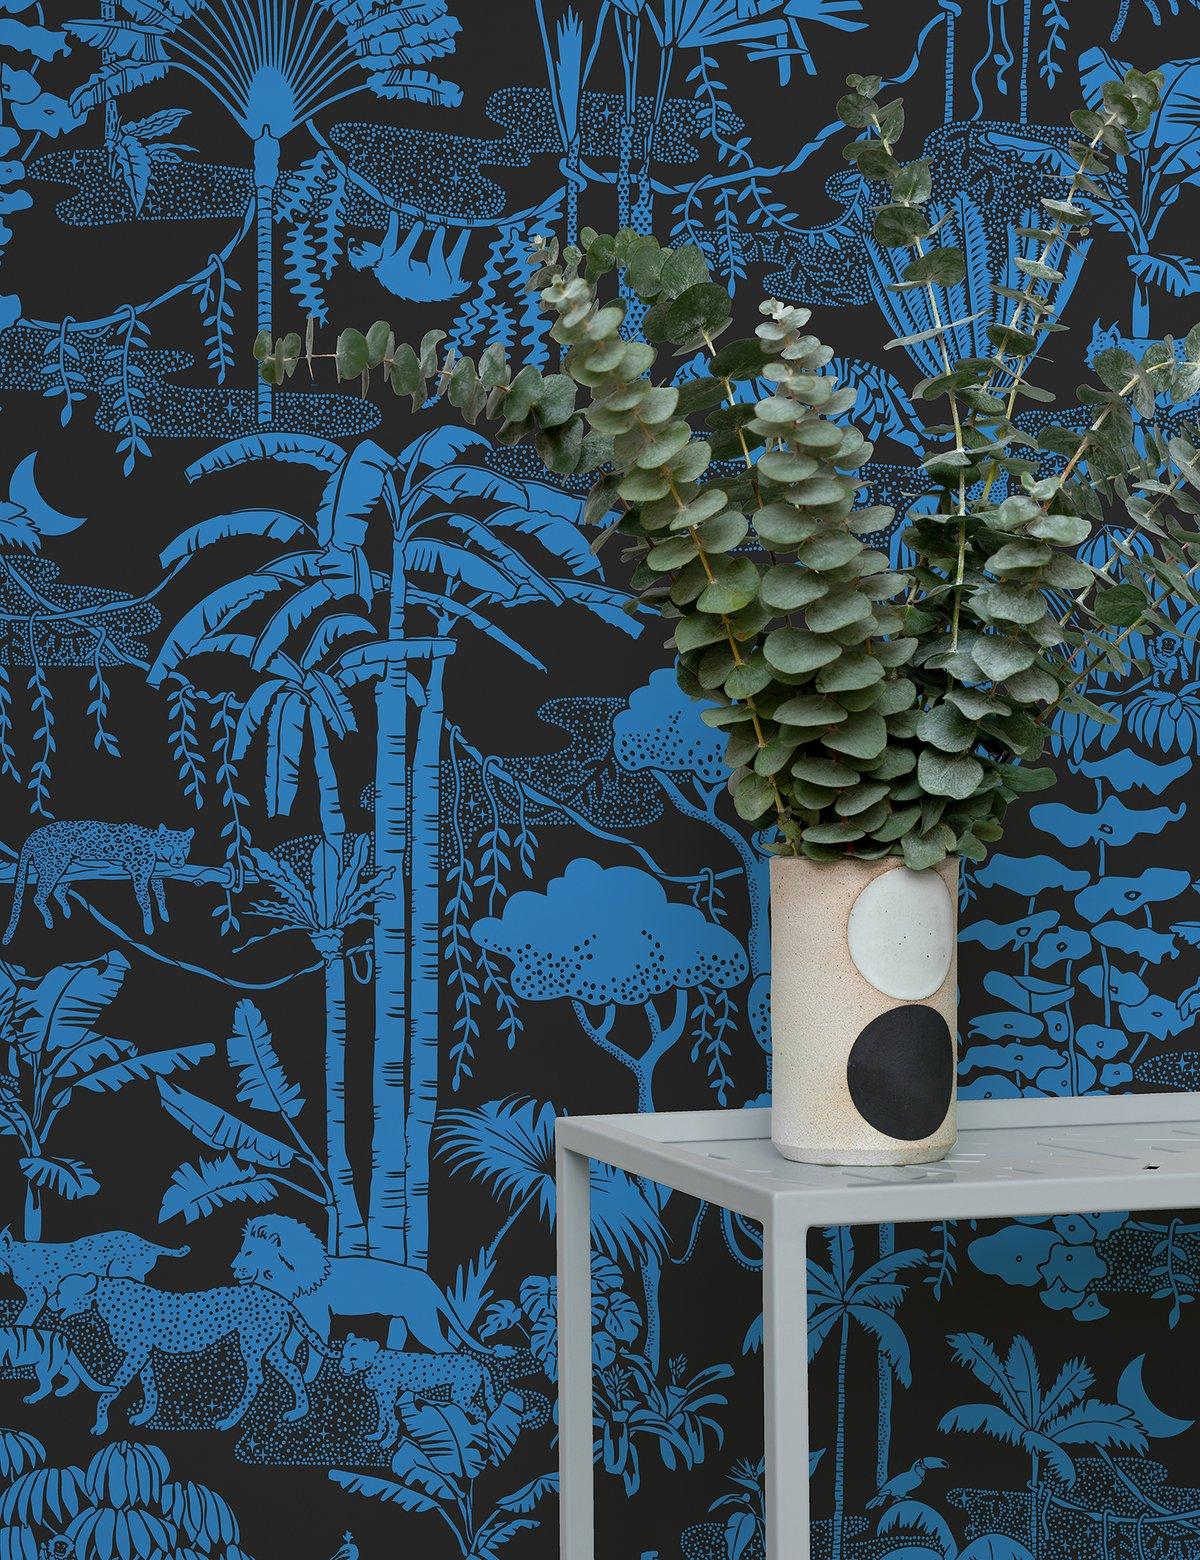 Get lost in this nocturnal fantasy jungle-scape! Flora and fauna combine to create the ultimate dreamy pattern.

Printing: Digital pigment print (minimum order of 4 rolls).
Material: FSC-certified paper. 
Trimming: This product may come pre-trimmed